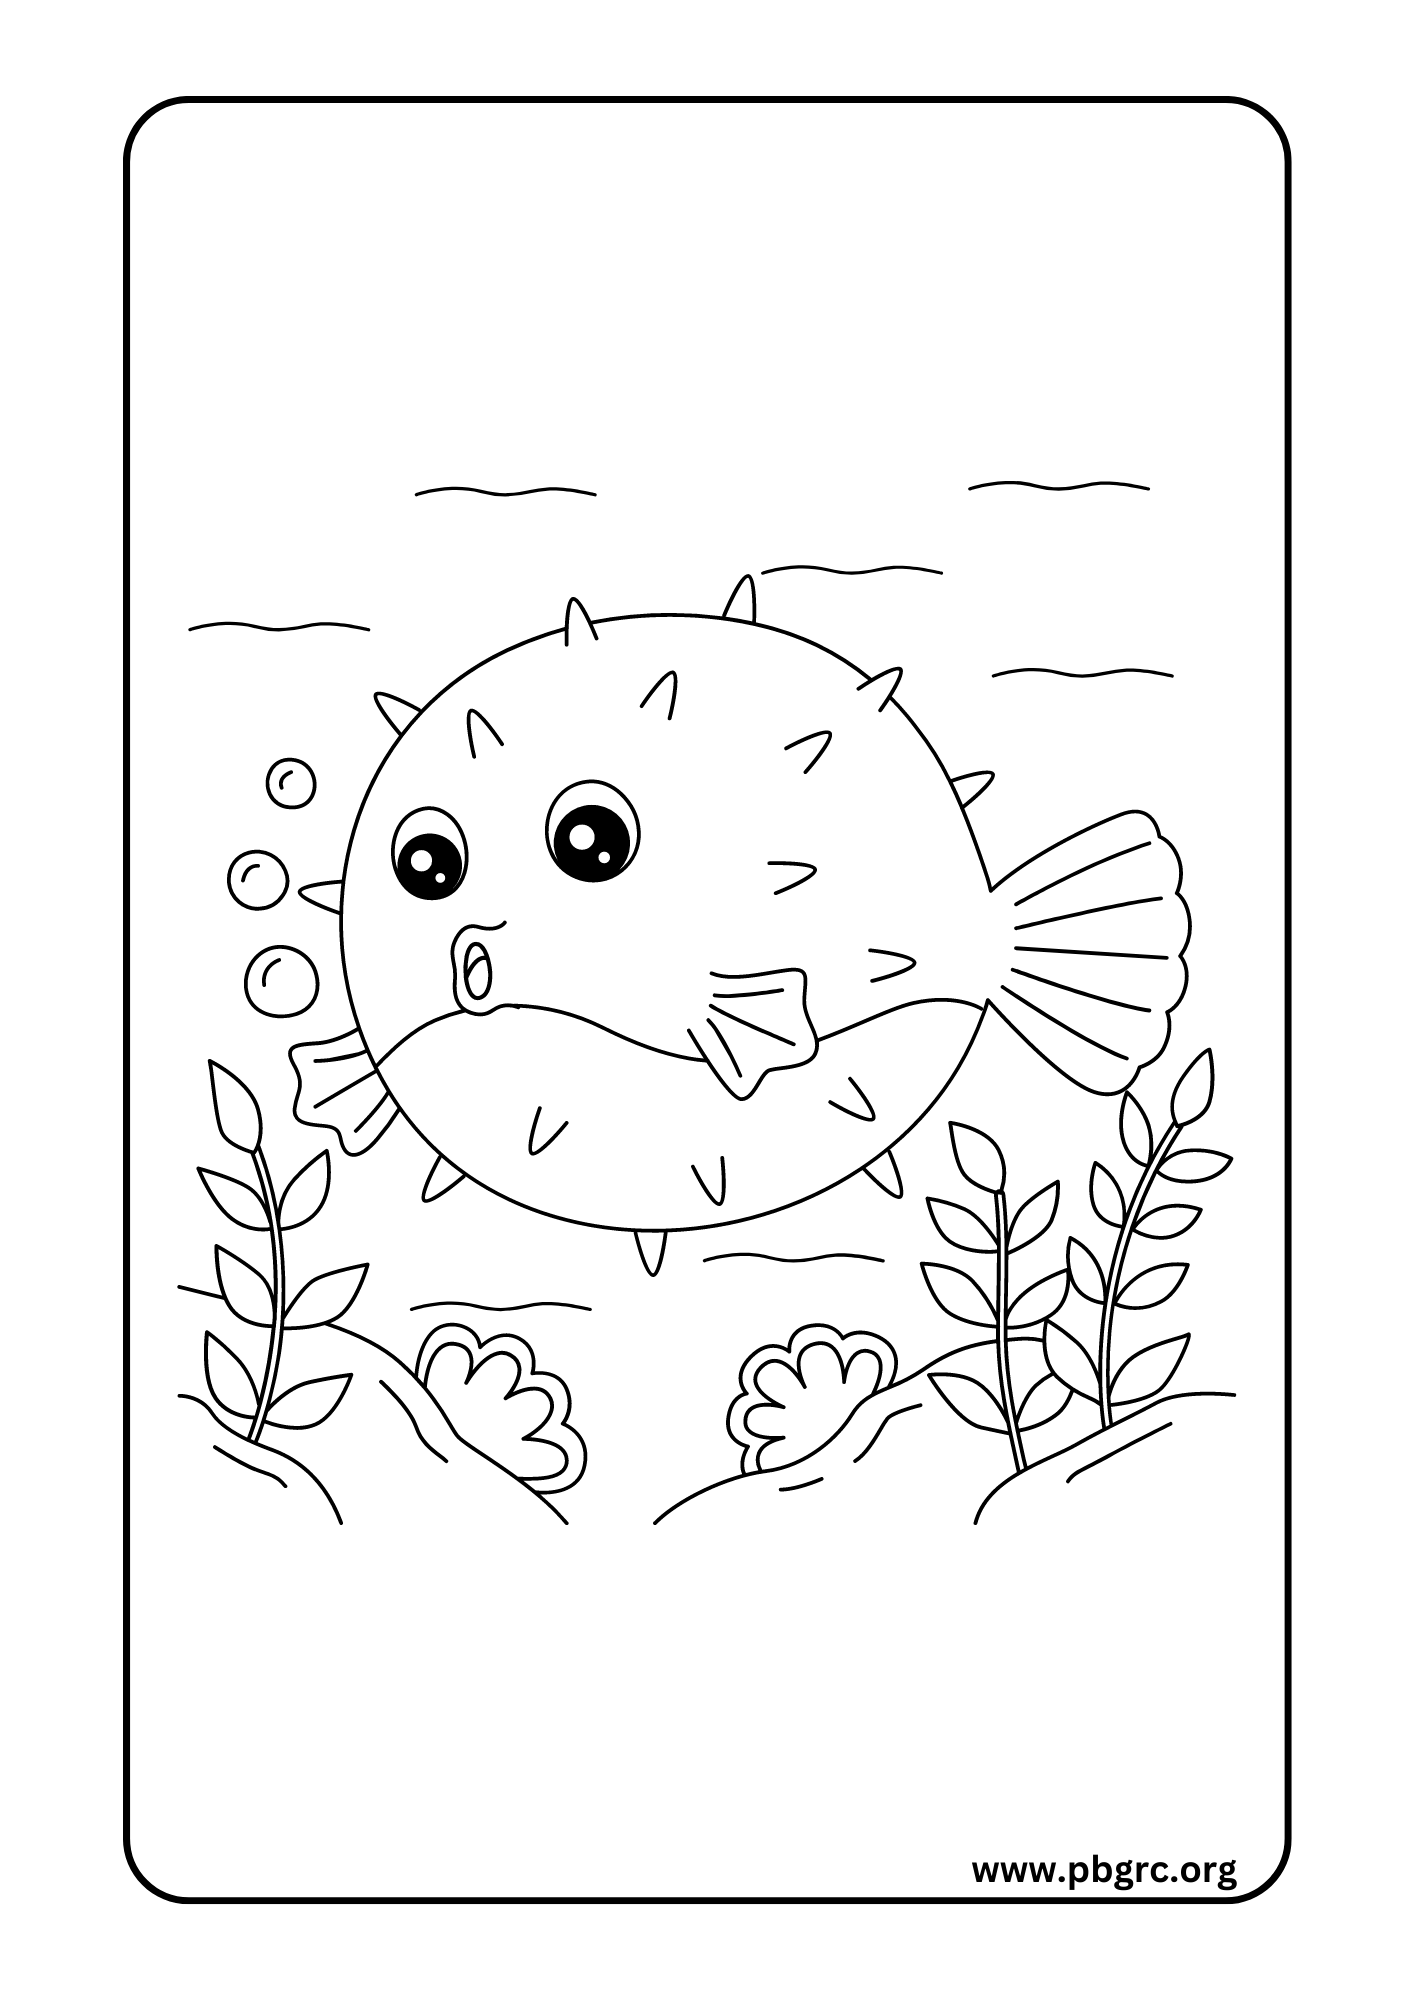 Sea Animal Coloring Pages